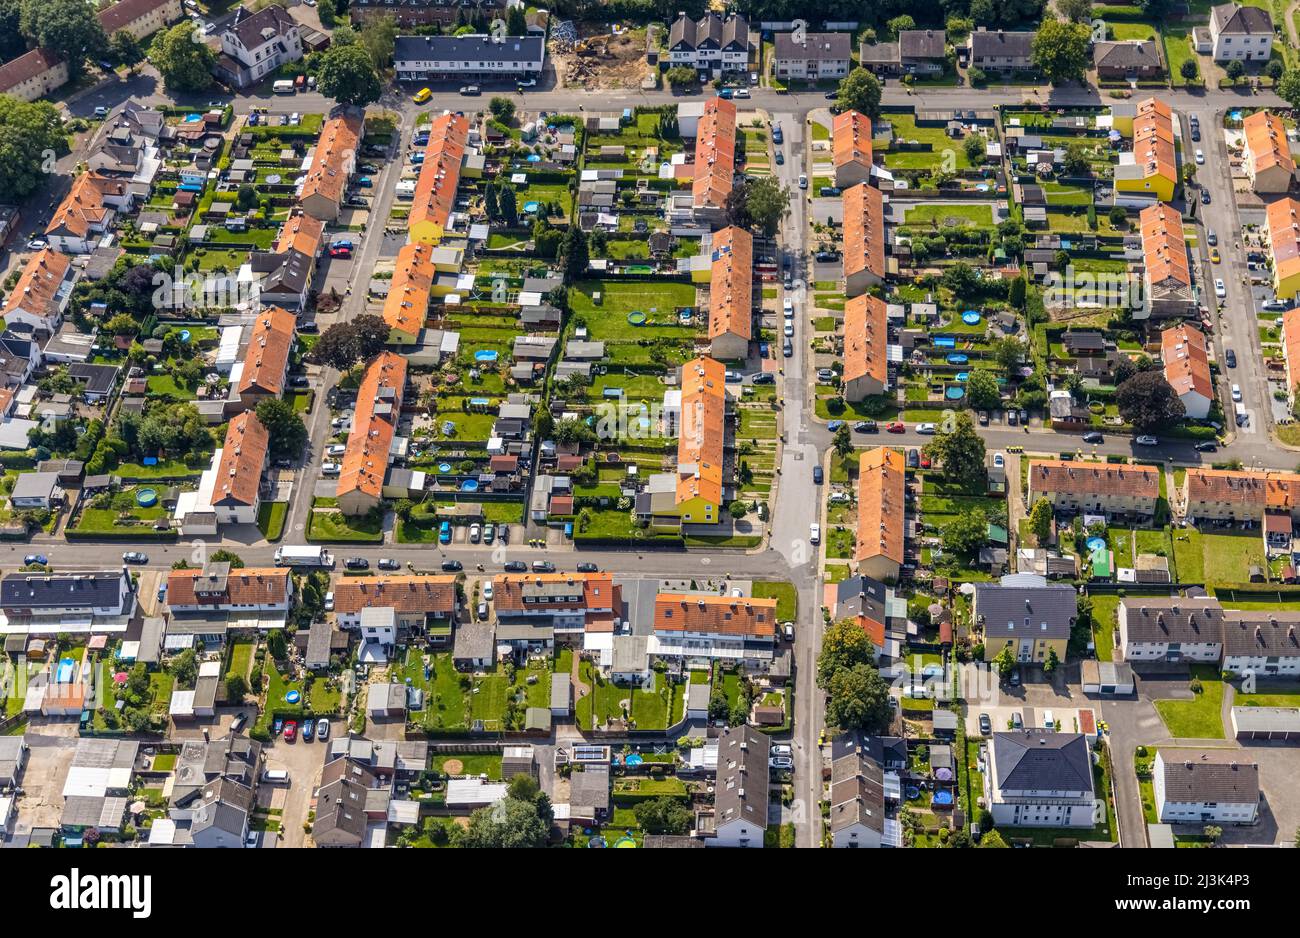 Aerial view, miners' housing estate between Pröbstingstraße and Bergstraße with red roofs in the district of Heeren-Werve, Kamen, Ruhr area, North Rhi Stock Photo